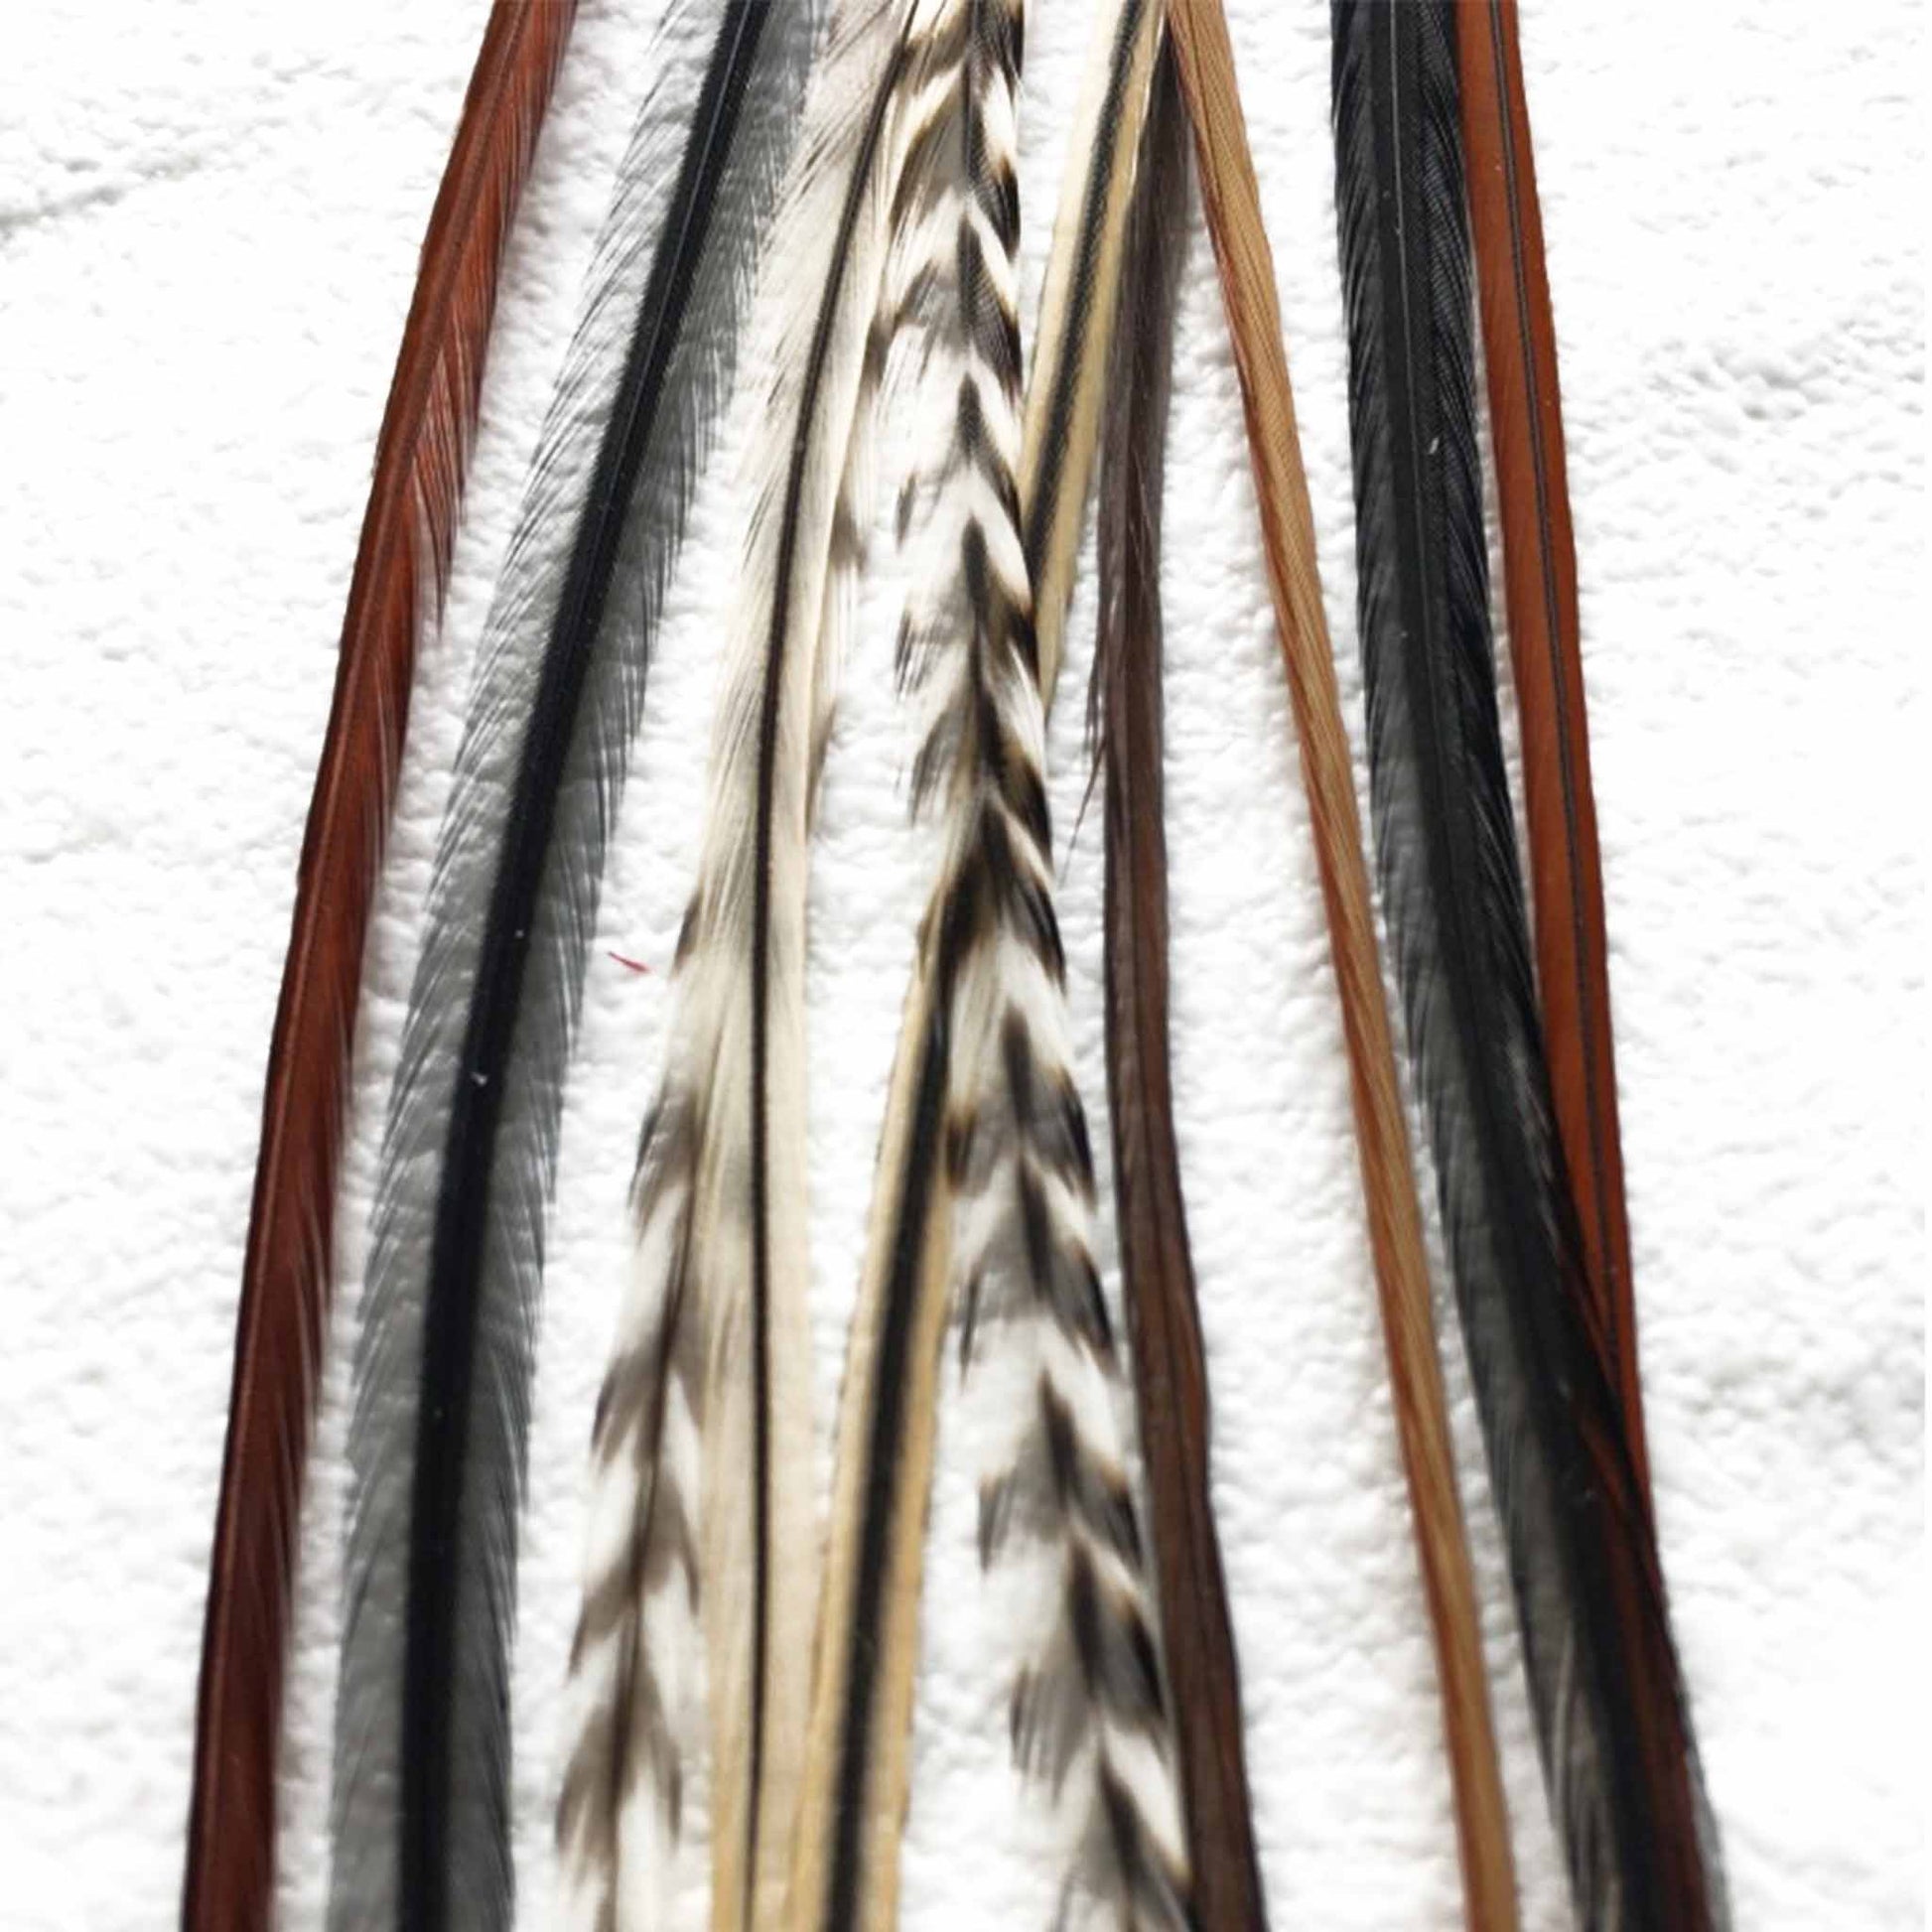 Bulk Feathers - 12 feathers- Natural colors